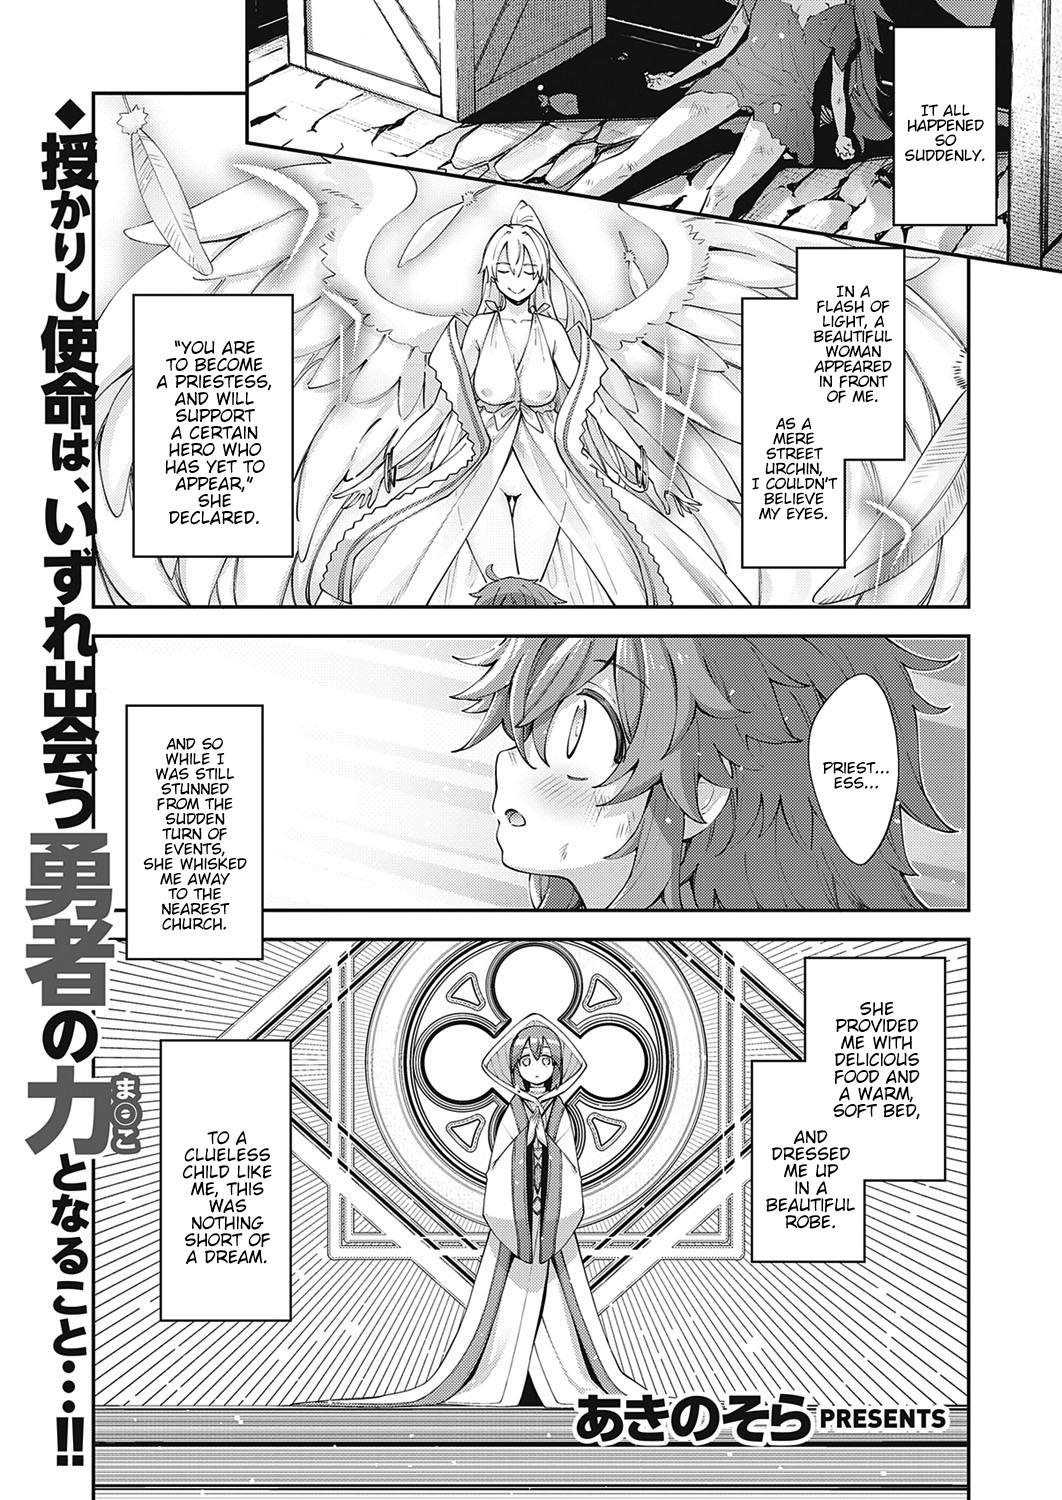 Hentai Manga Comic-I Came to Another World, So I Think I'm Gonna Enjoy My Sex Skills to the Fullest! 2nd Shot-Read-1